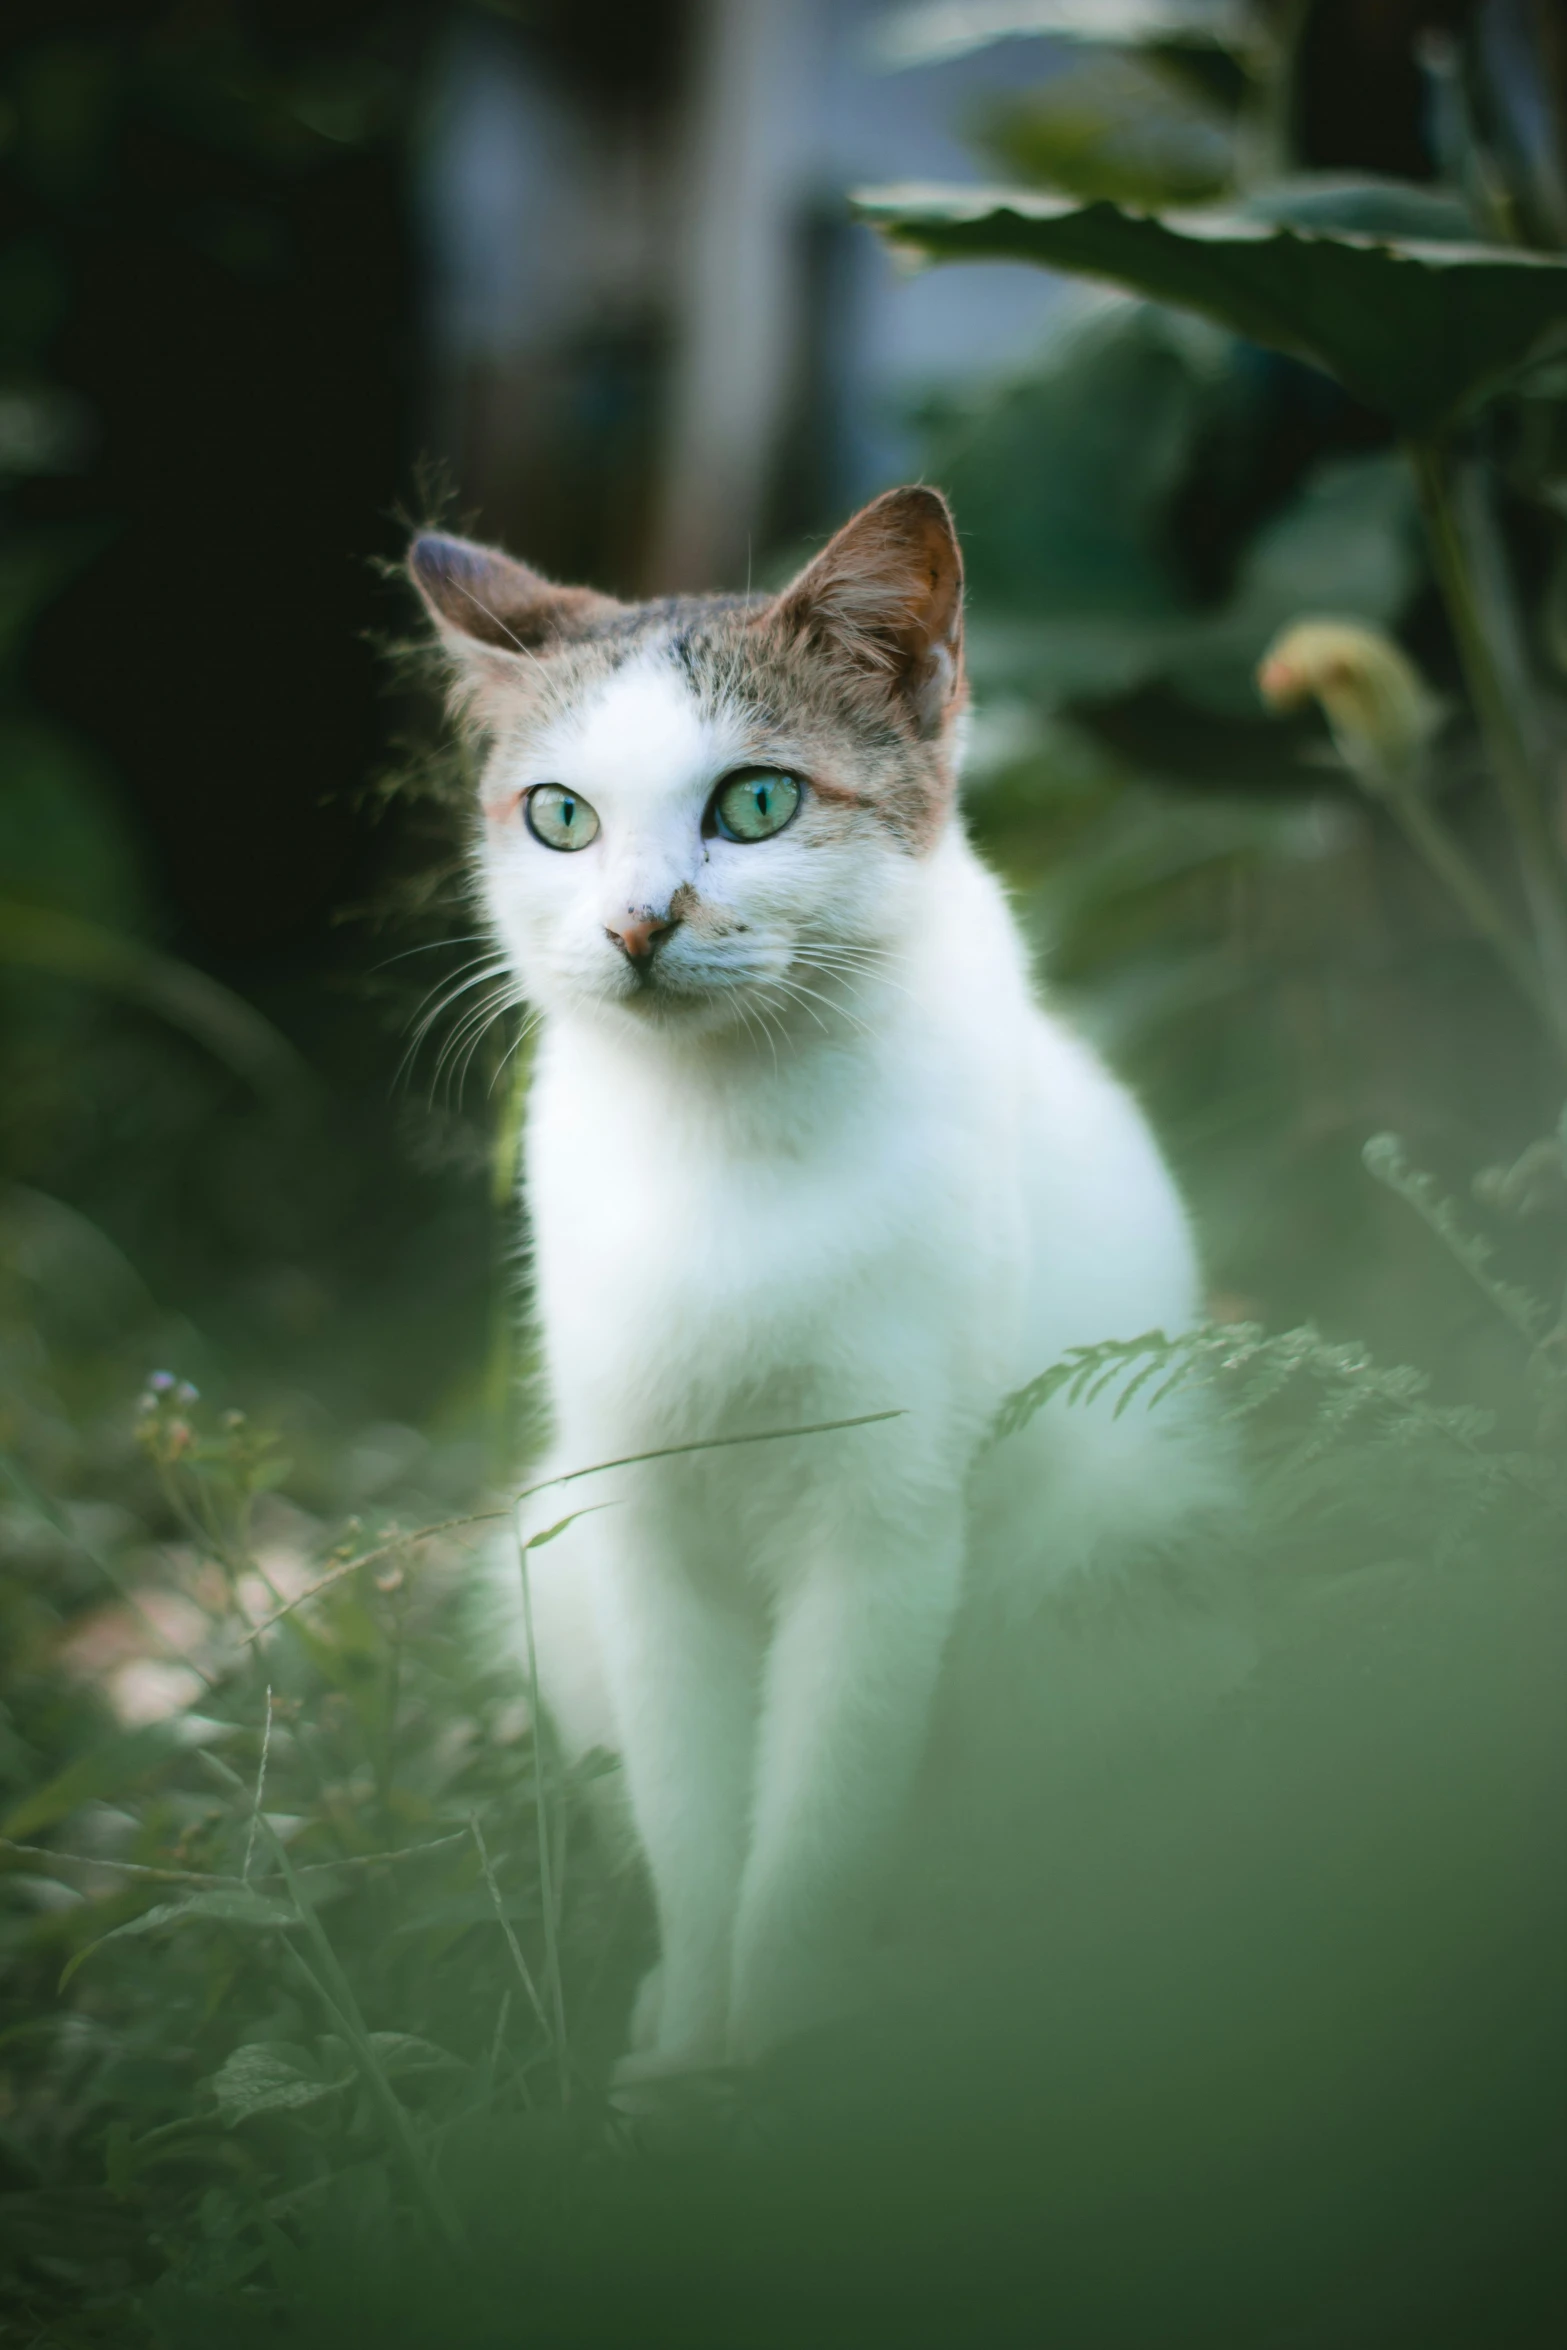 a cat with blue eyes walking in the grass